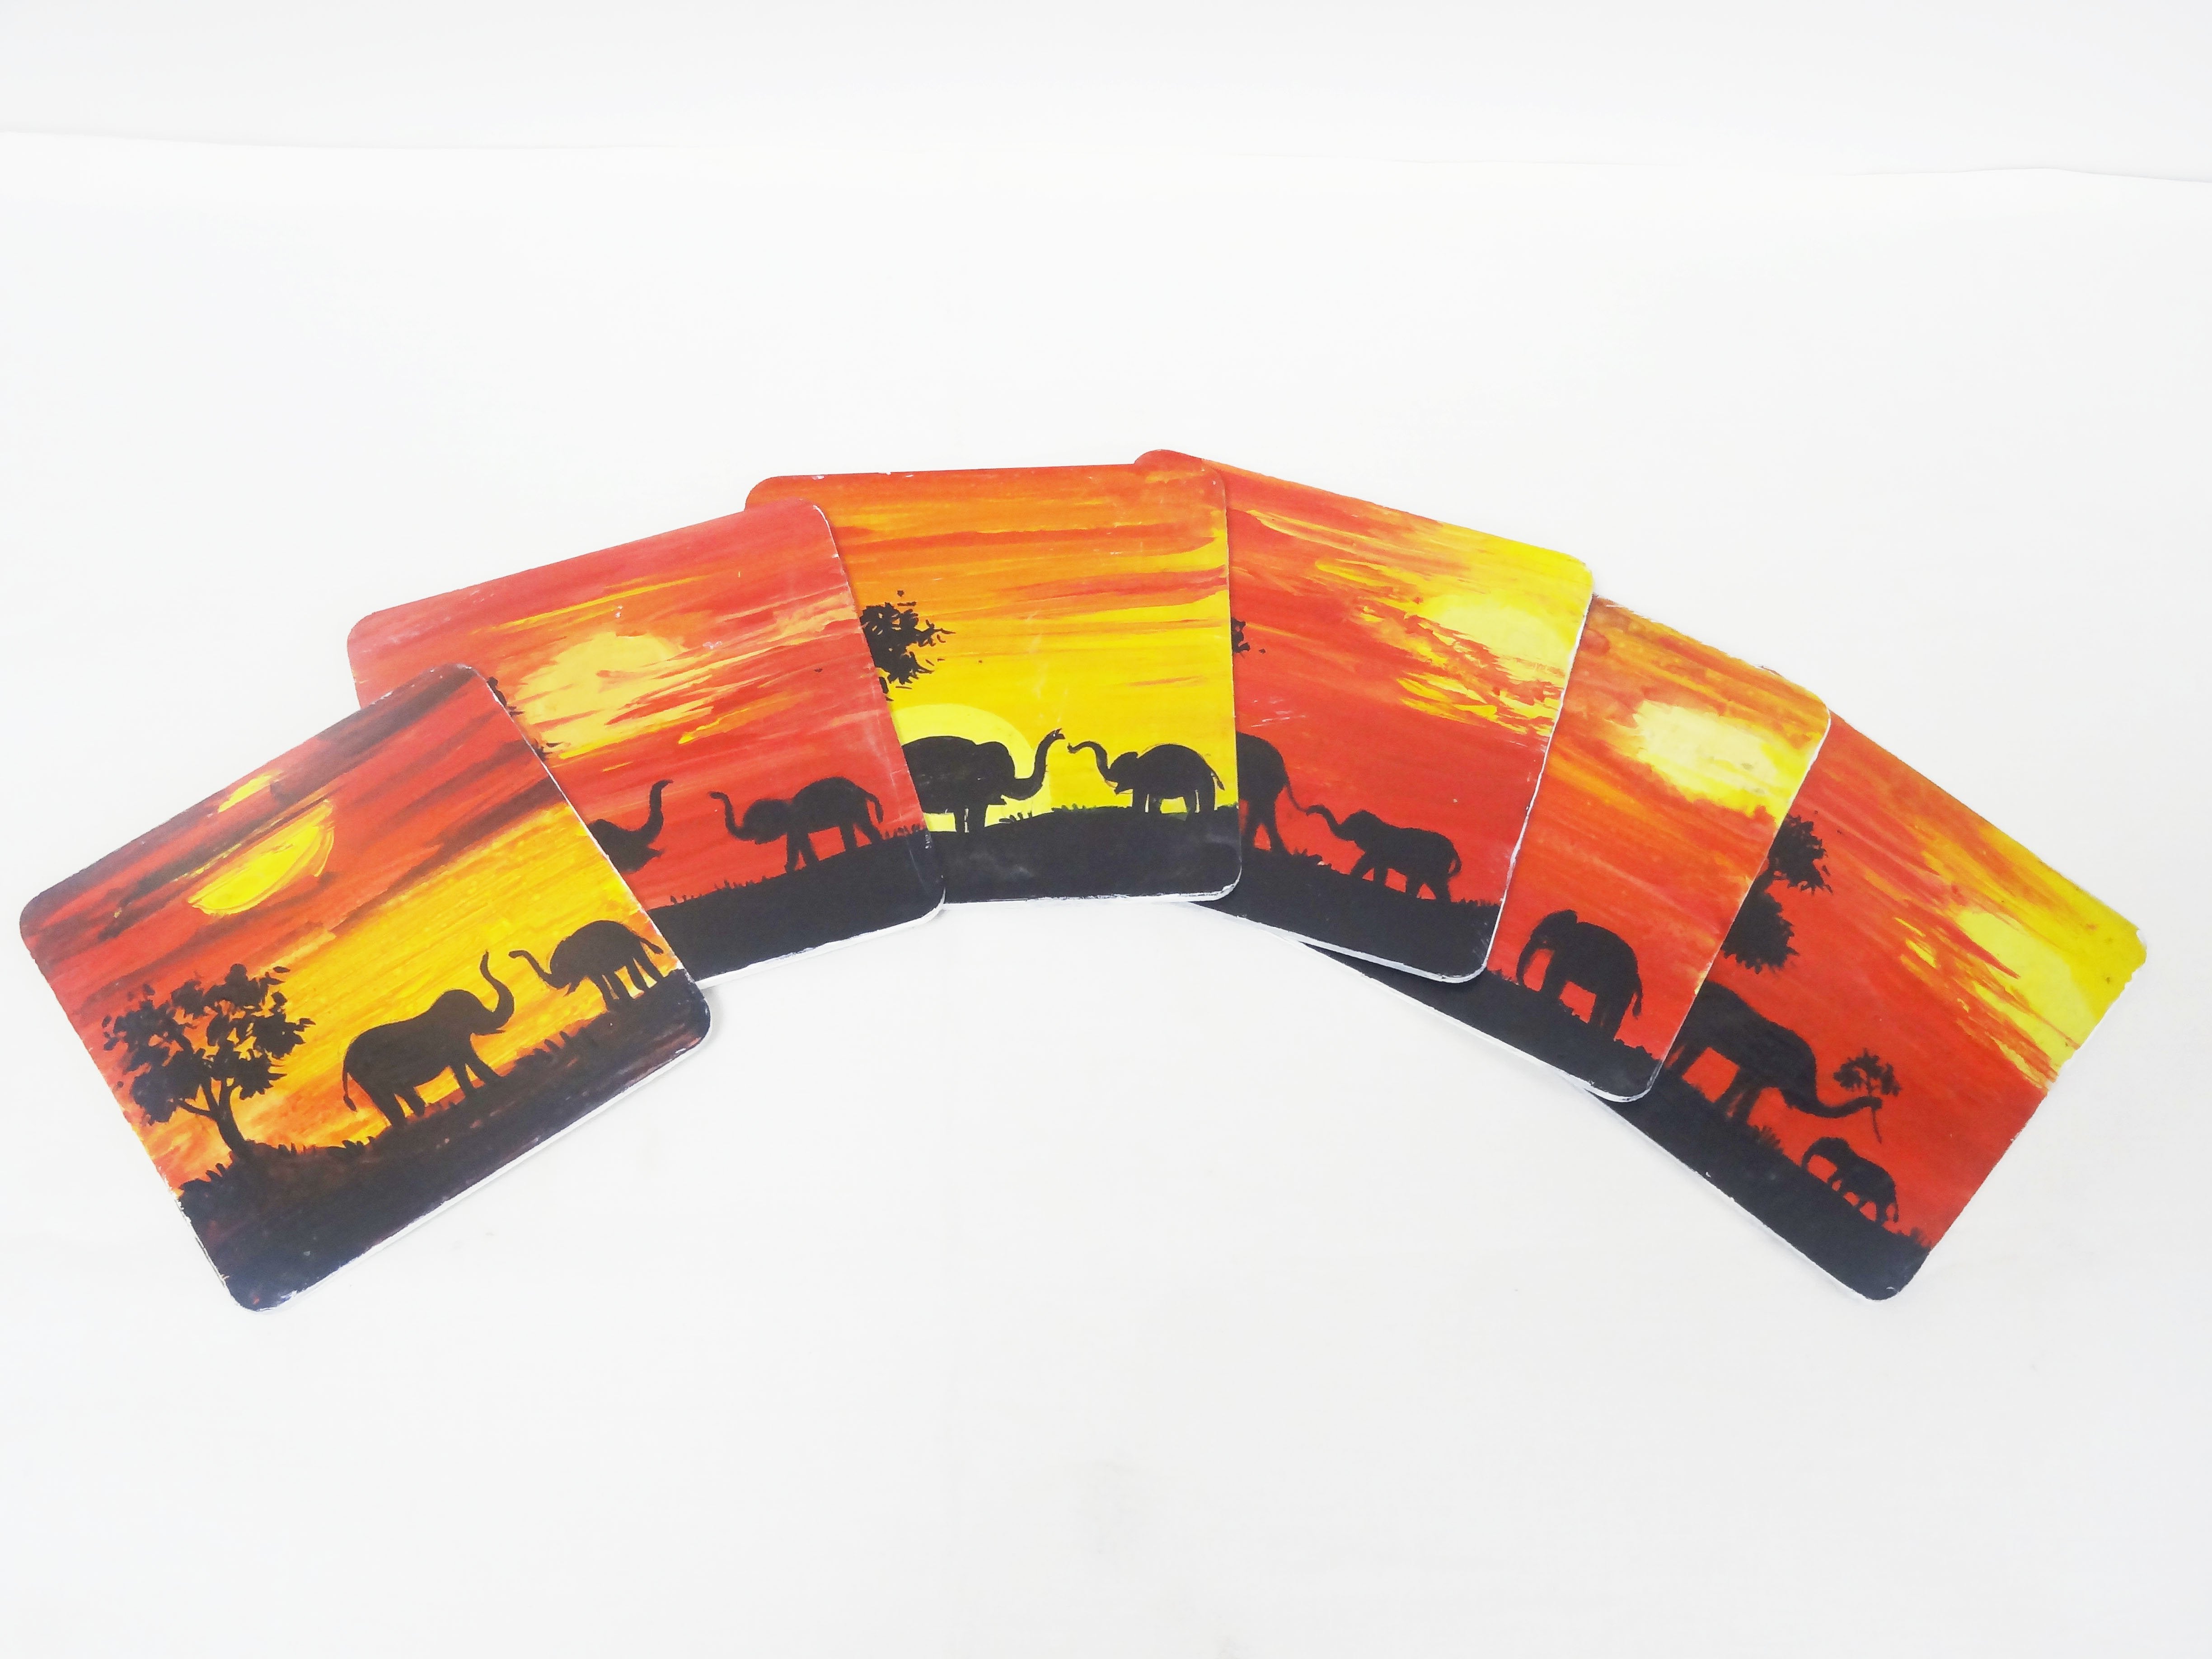 Nakshi Wooden Hand-Painted 'Life under Forest Dawn' Coaster Set (Pack of 6) 4"x4"